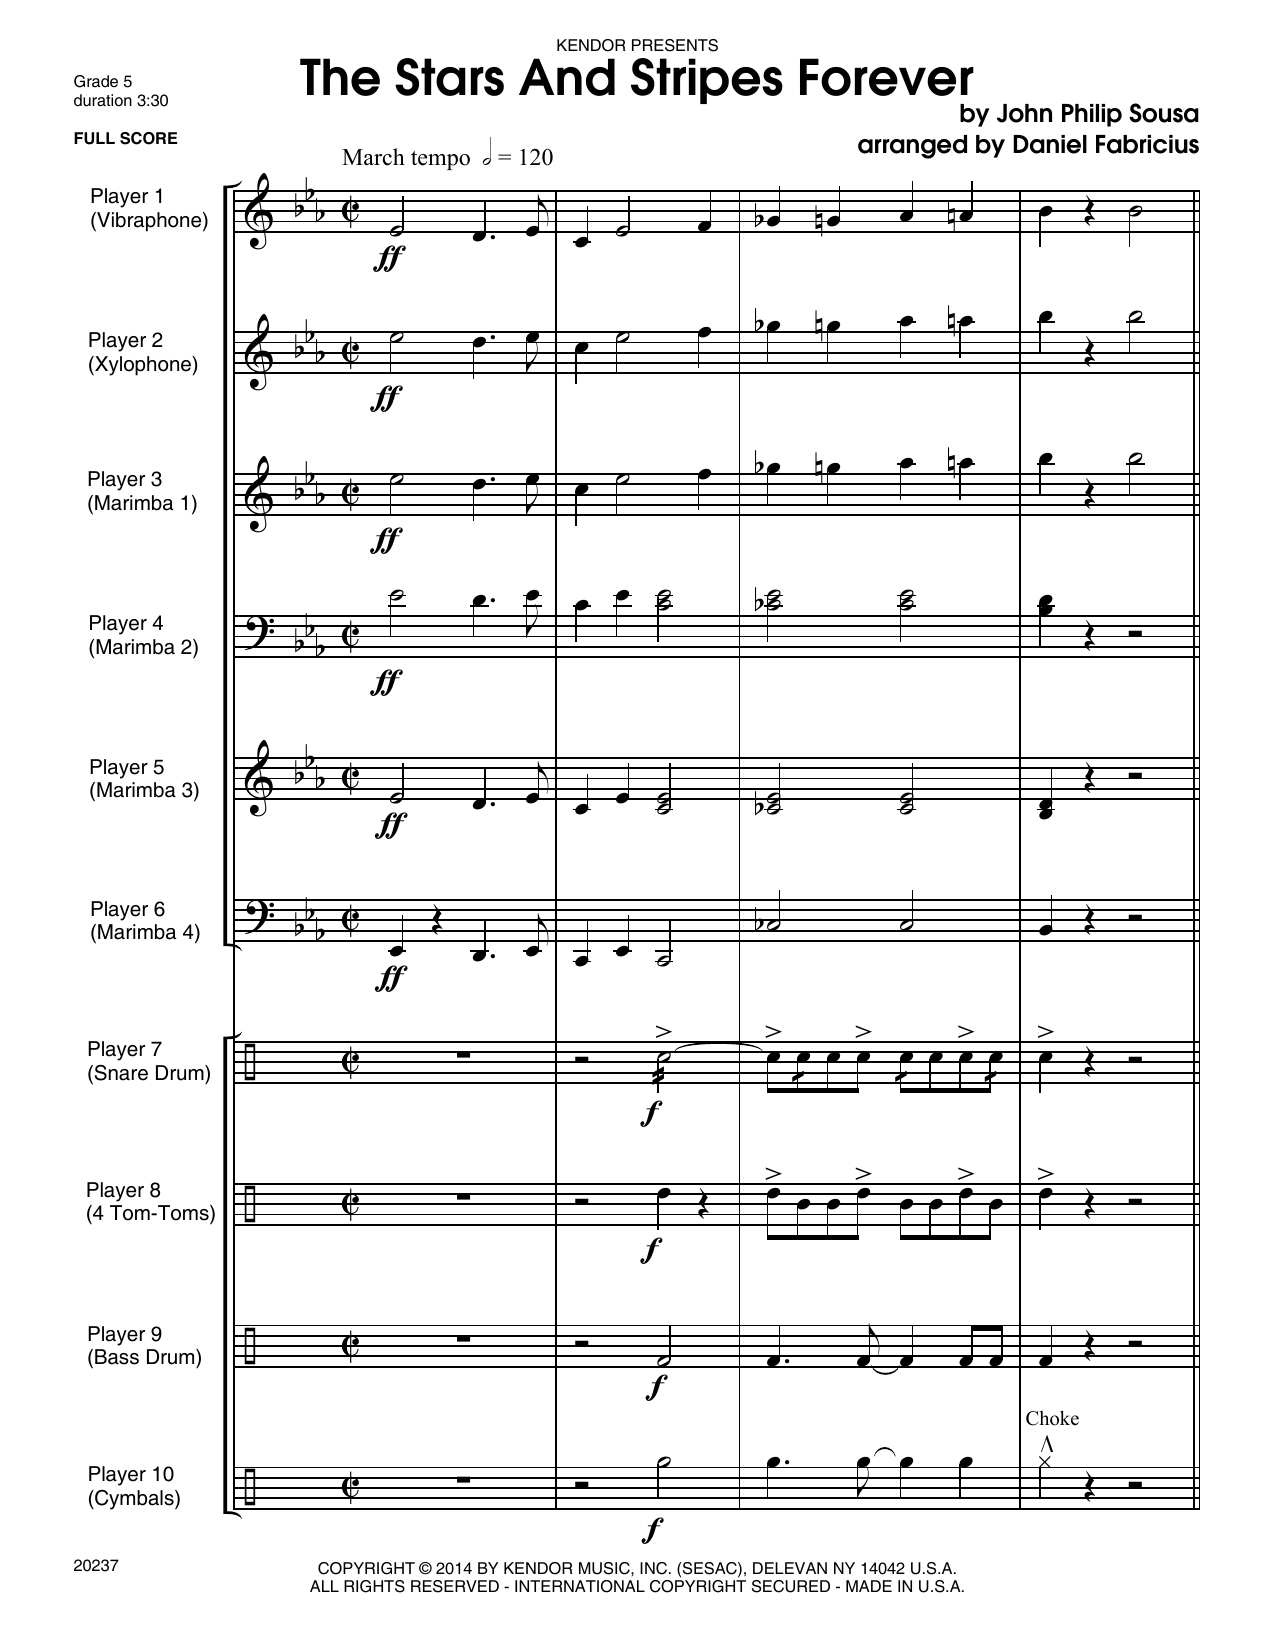 Download Daniel Fabricious The Stars And Stripes Forever - Full Sc Sheet Music